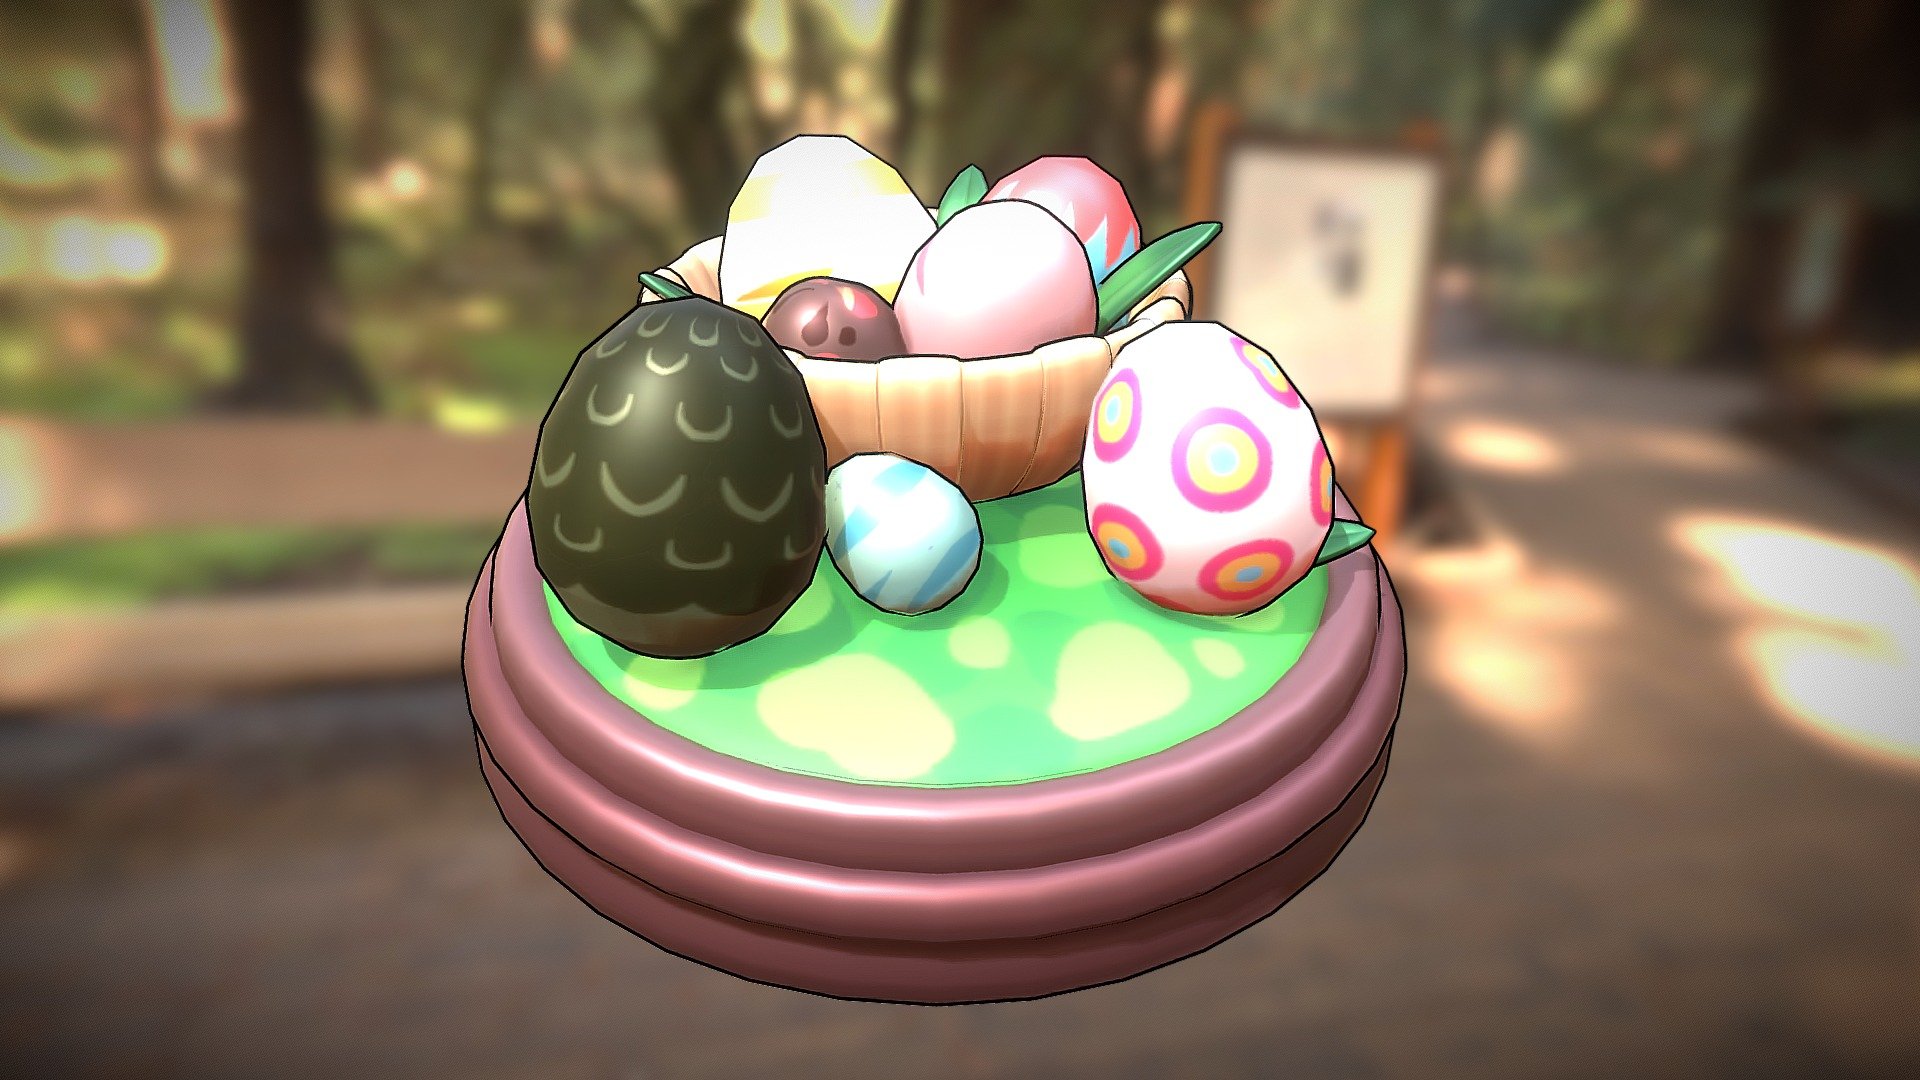 featuring eggs based on: Clair, Grimbelle, Citrus, Honeysuckle, Dill, Peach and Jaxon - Chimereggs - 3D model by Cosmind (@Cosmindart) 3d model